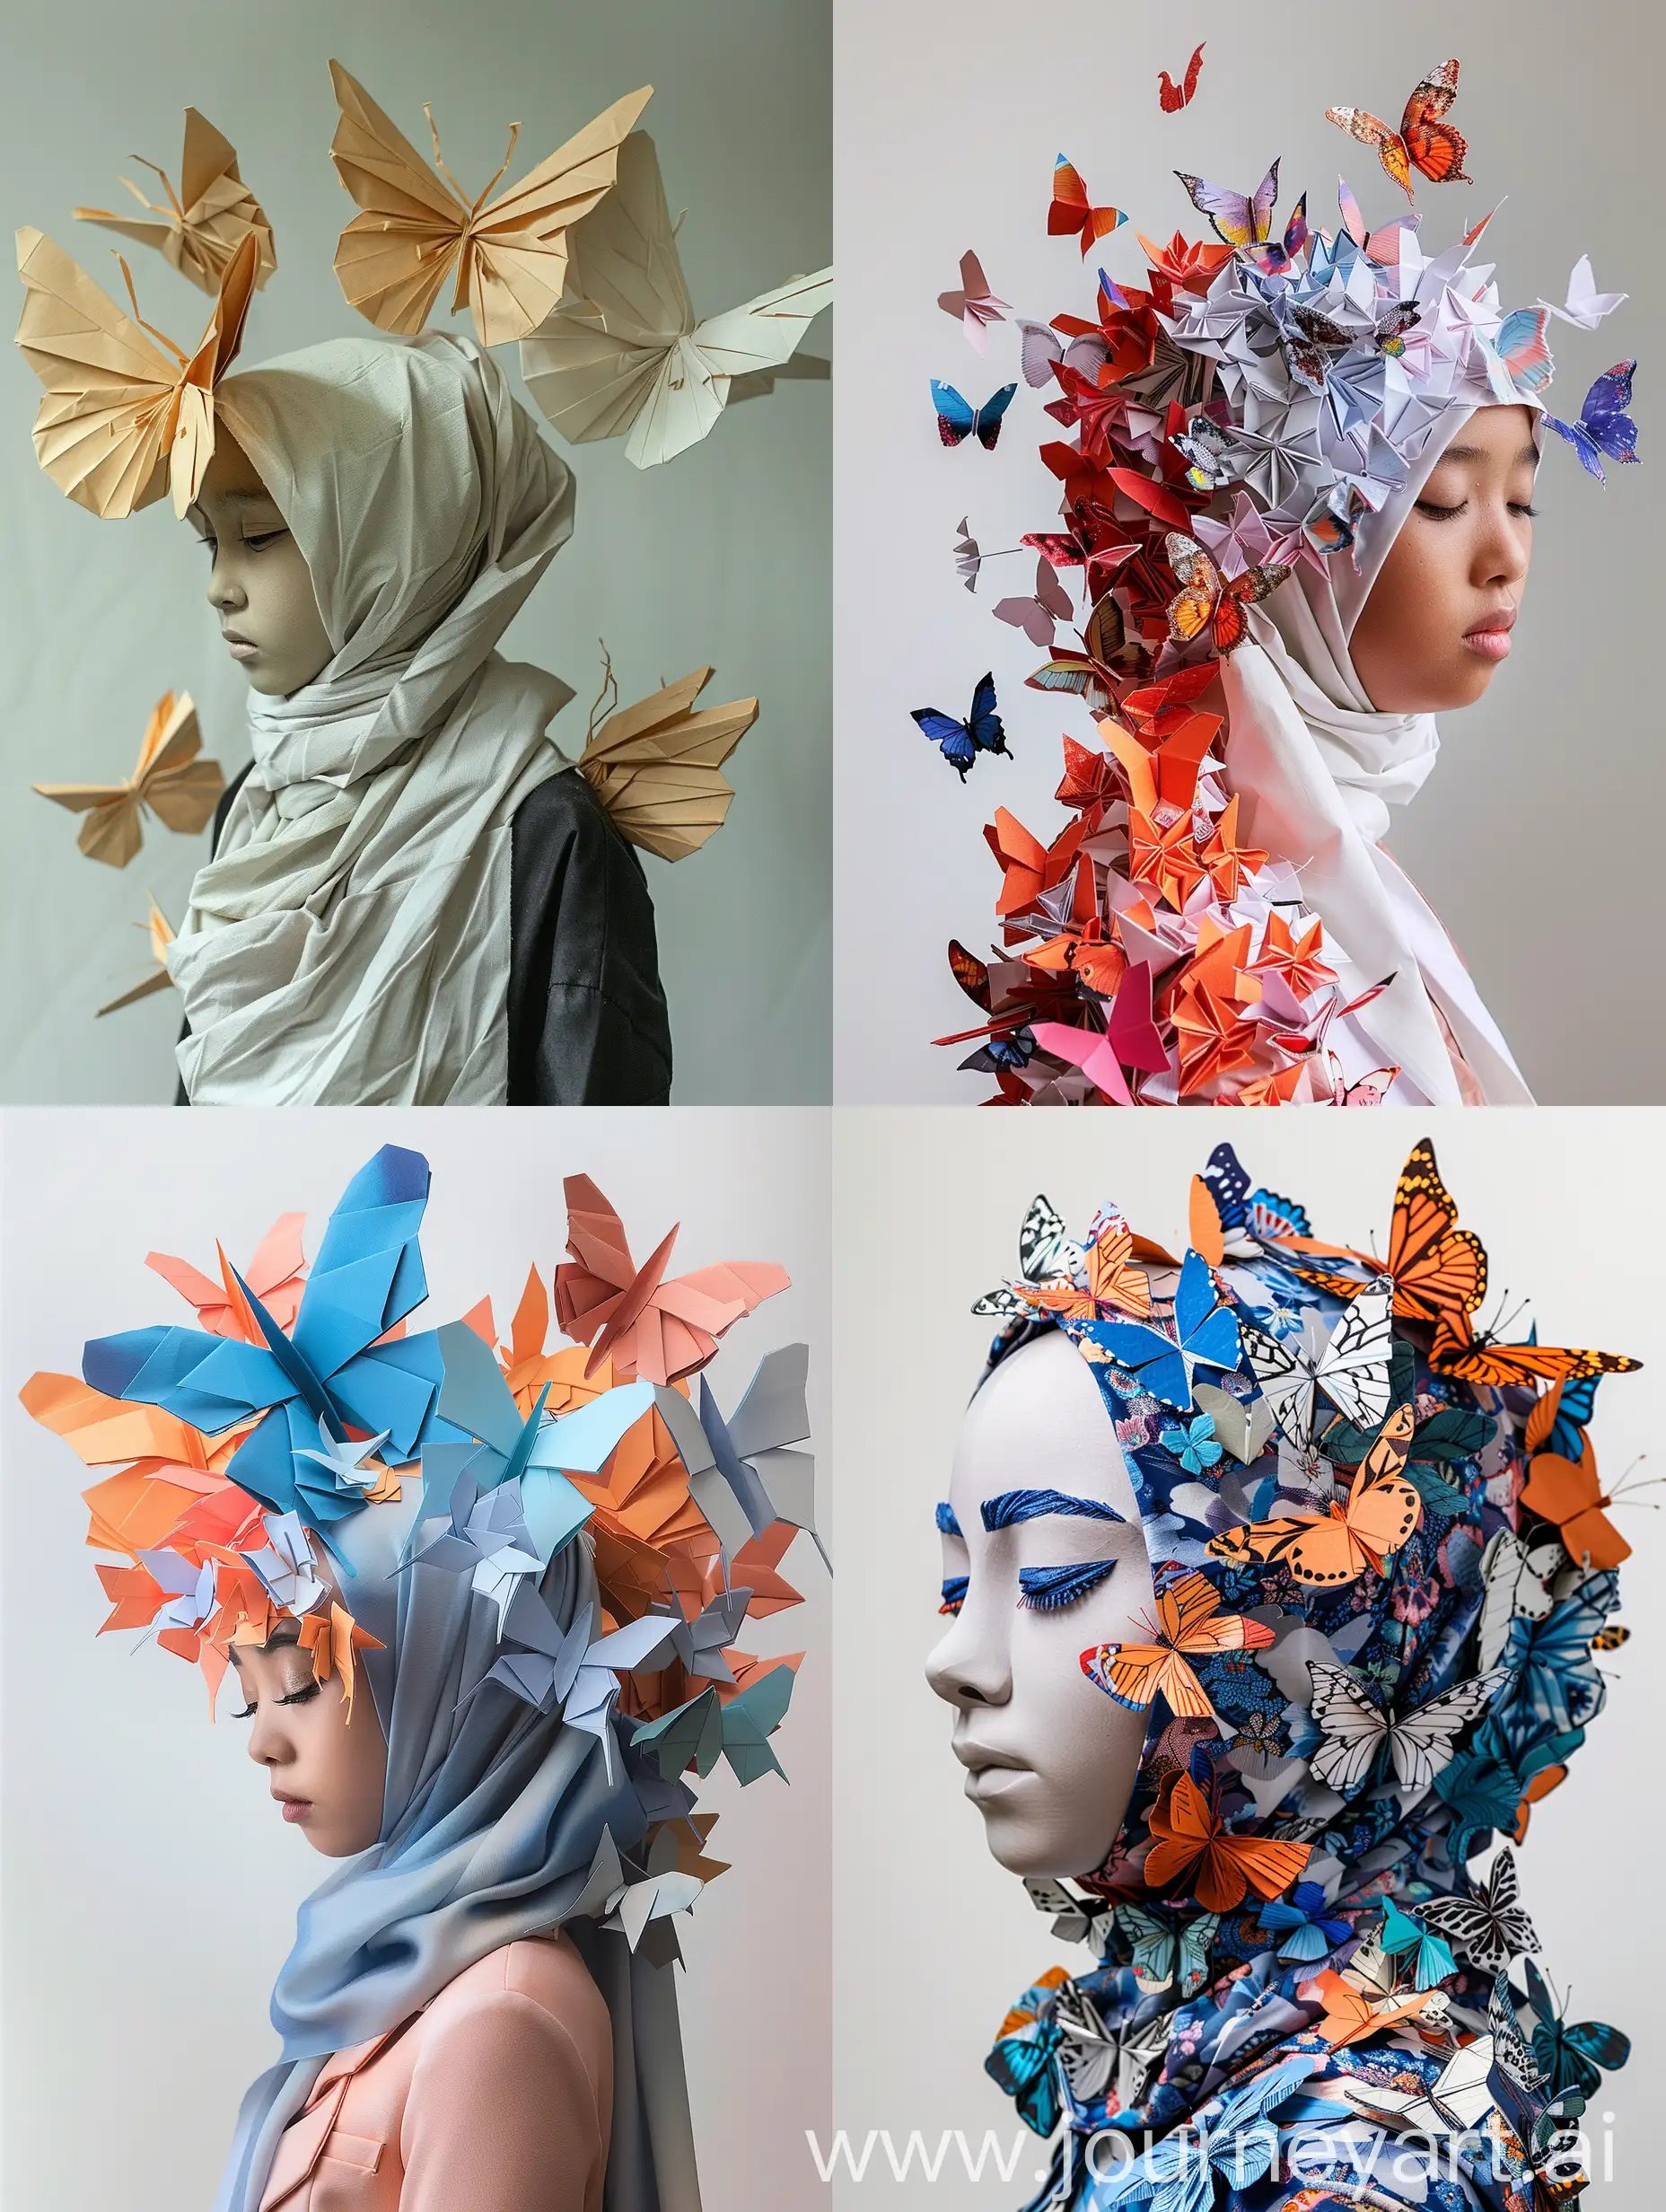 This series, "Girl hijab and Butterfly," showcases the dreamlike interplay between girls and butterflies through origami sculptures, conveying symbols of innocence, transformation, and beauty.

Butterflies represent rebirth and the transcendence of the soul, girls symbolize purity and hope, while paper signifies the continuation of knowledge, art, and culture. Through exquisite origami techniques, the artist merges these elements to create serene and poetic scenes, evoking a deep contemplation of the fragility and beauty of life in the viewer.